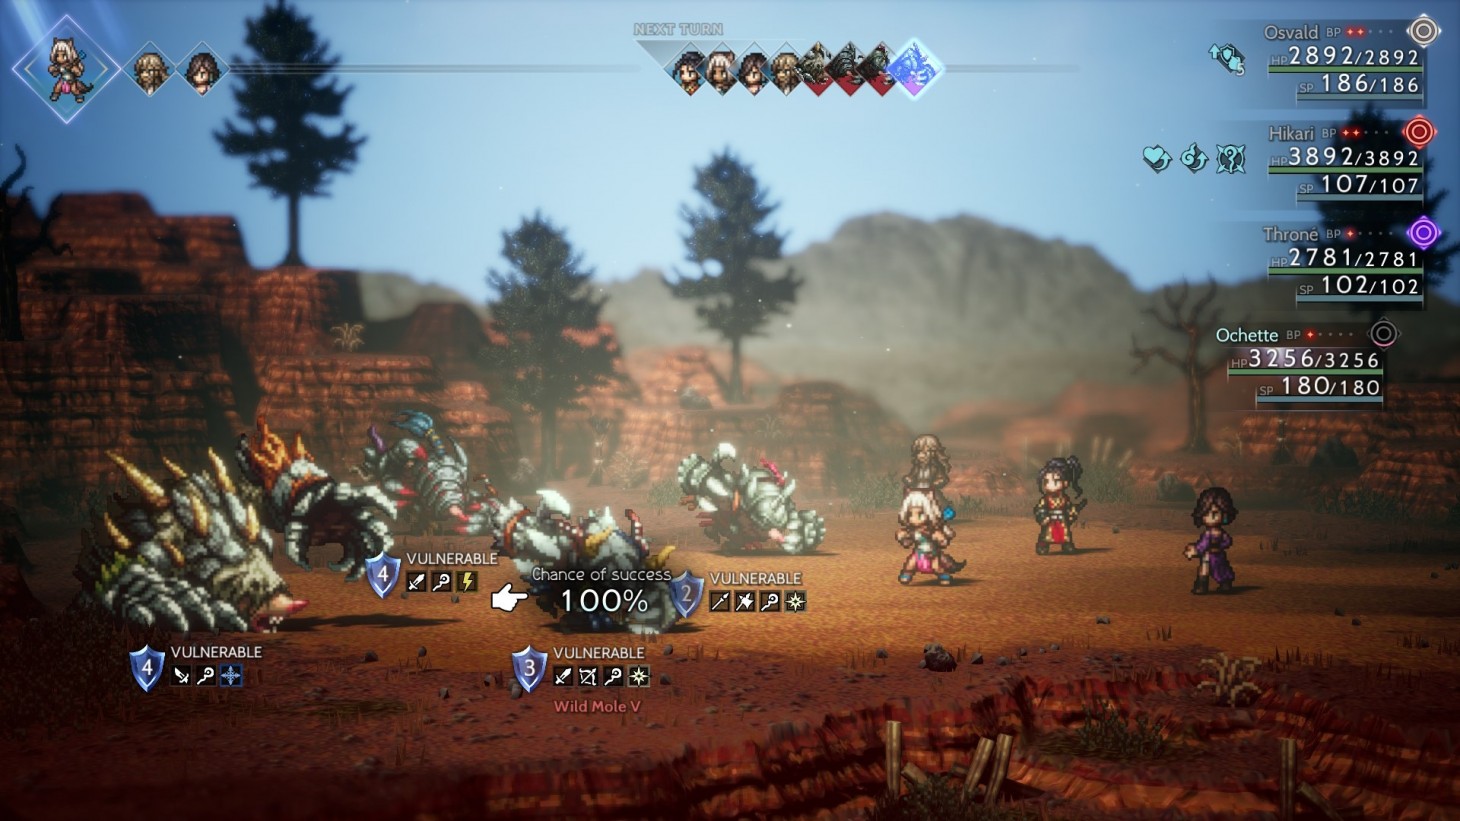 Octopath Traveler 2 Release Date, Trailer And Gameplay - What We Know So Far